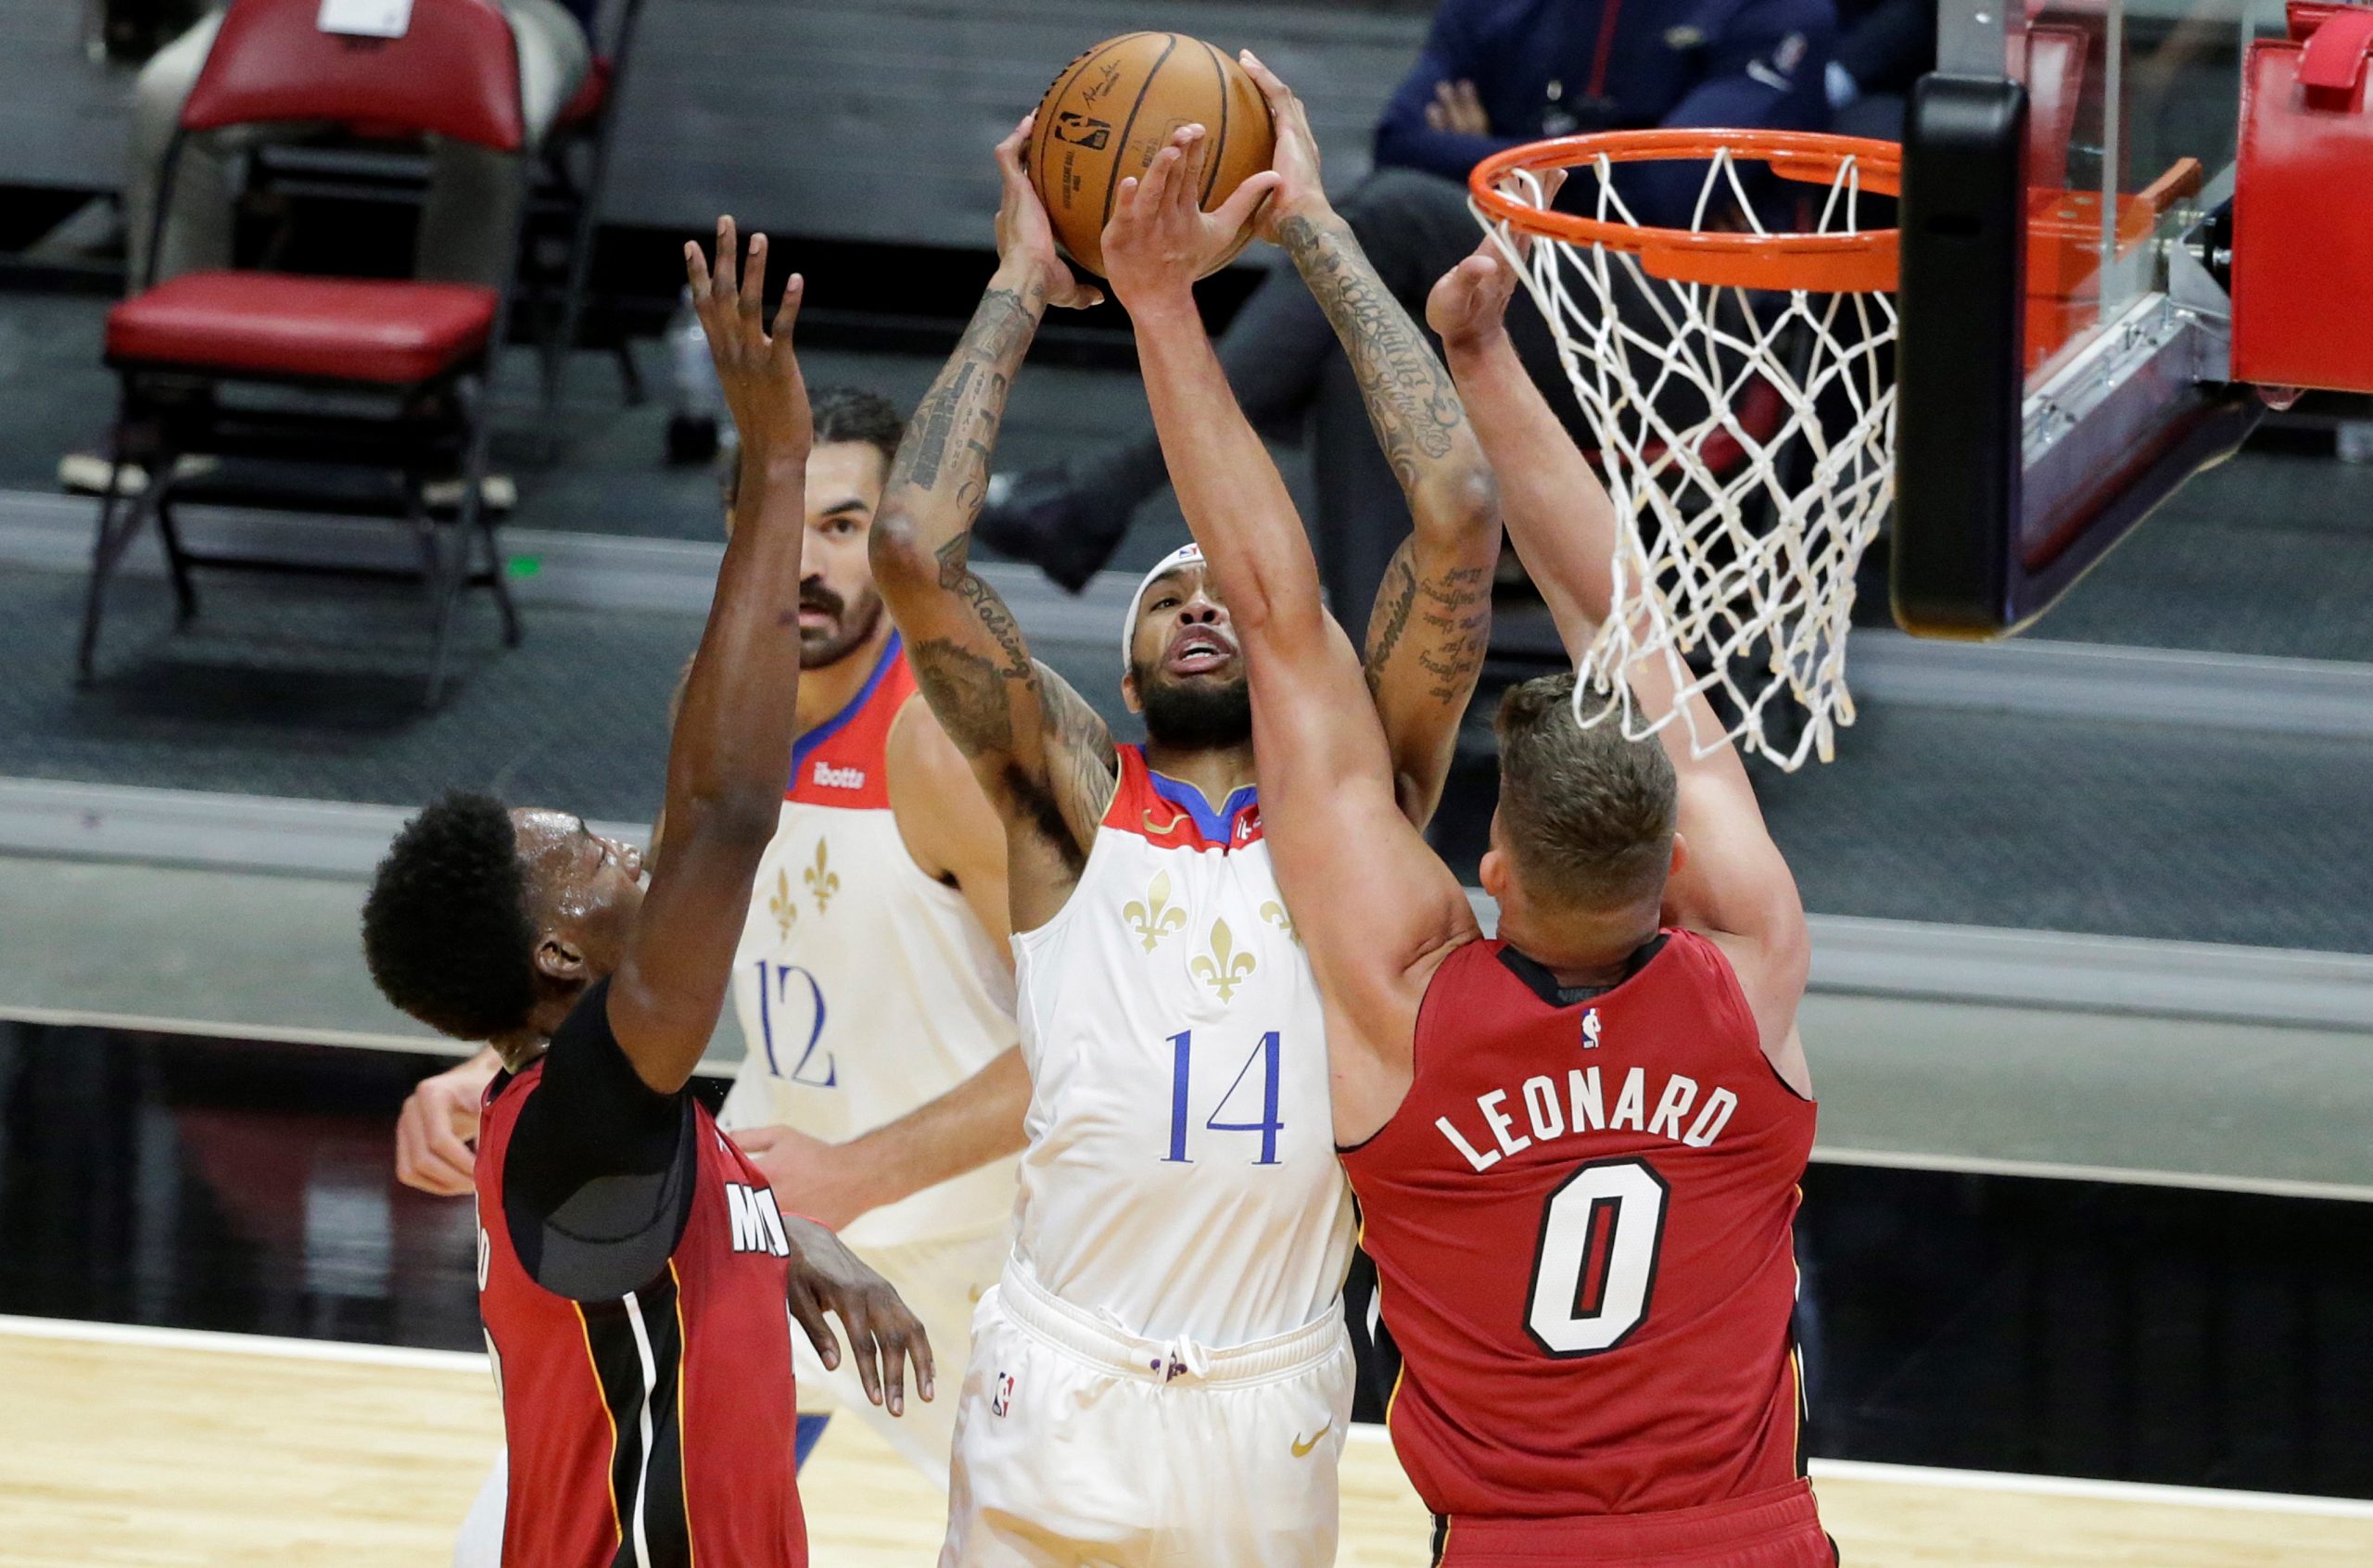 epa08903824 Miami Heat center Bam Adebayo (L), forward Meyers Leonard (R)  New Orleans Pelicans forward Brandon Ingram (C) in action during the first half of the NBA basketball game between the Miami Heat and the New Orleans Pelicans at AmericanAirlines Arena in Miami, Florida, USA, 25 December 2020.  EPA/RHONA WISE  SHUTTERSTOCK OUT